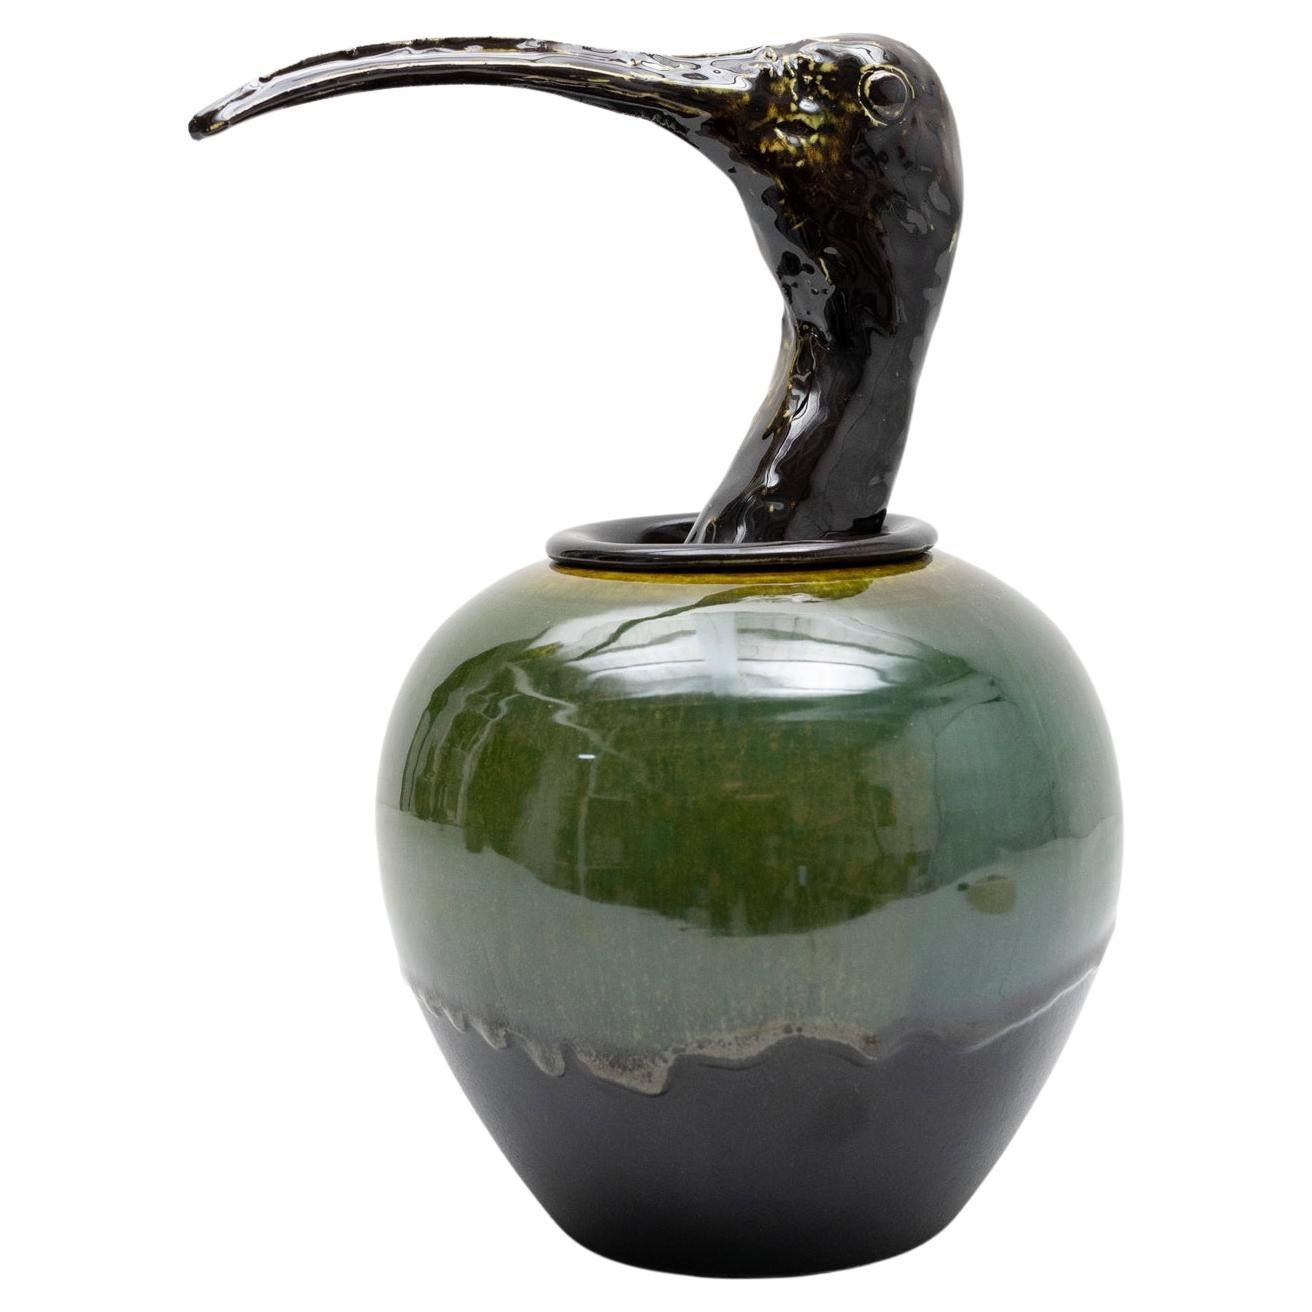 Italian Contemporary Artistic Ceramic Canopo Ibis Black and Green Vase by Amaaro For Sale